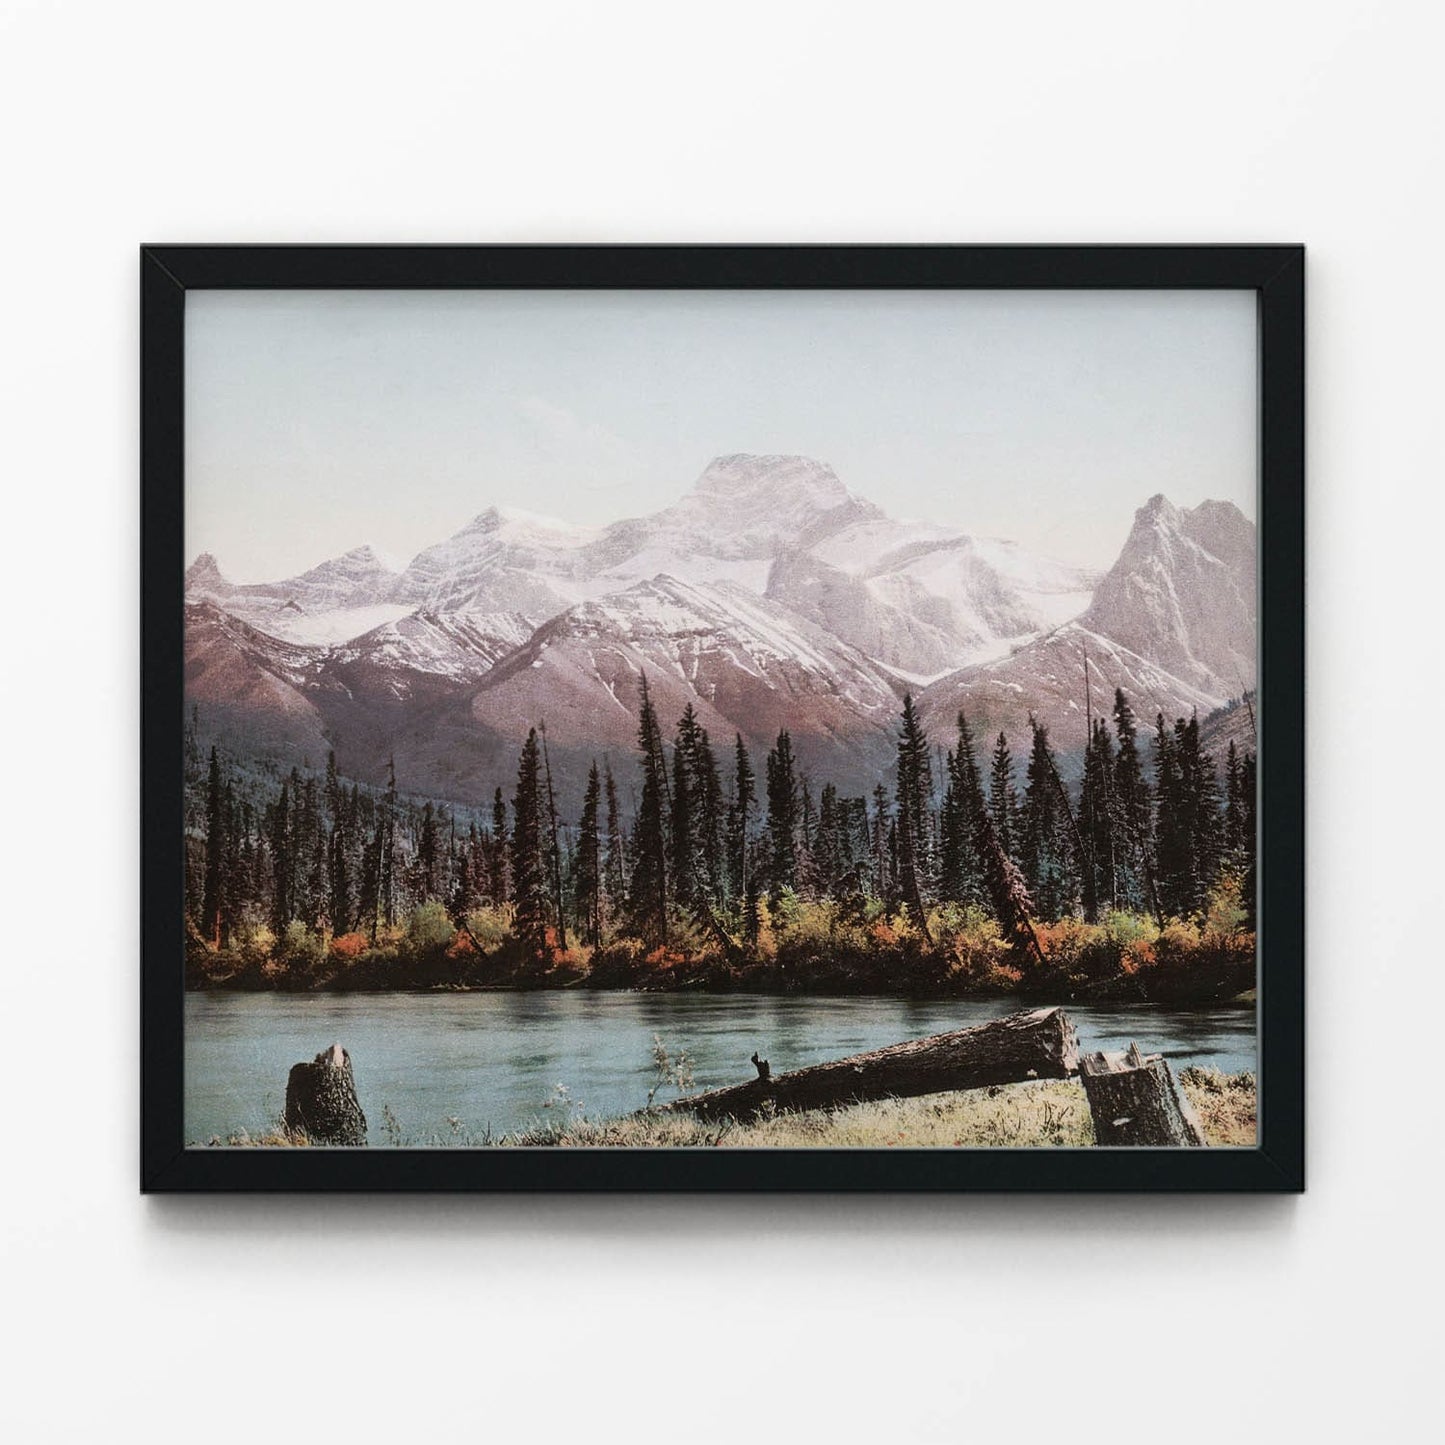 Beautiful Mountain Art Print in Black Picture Frame